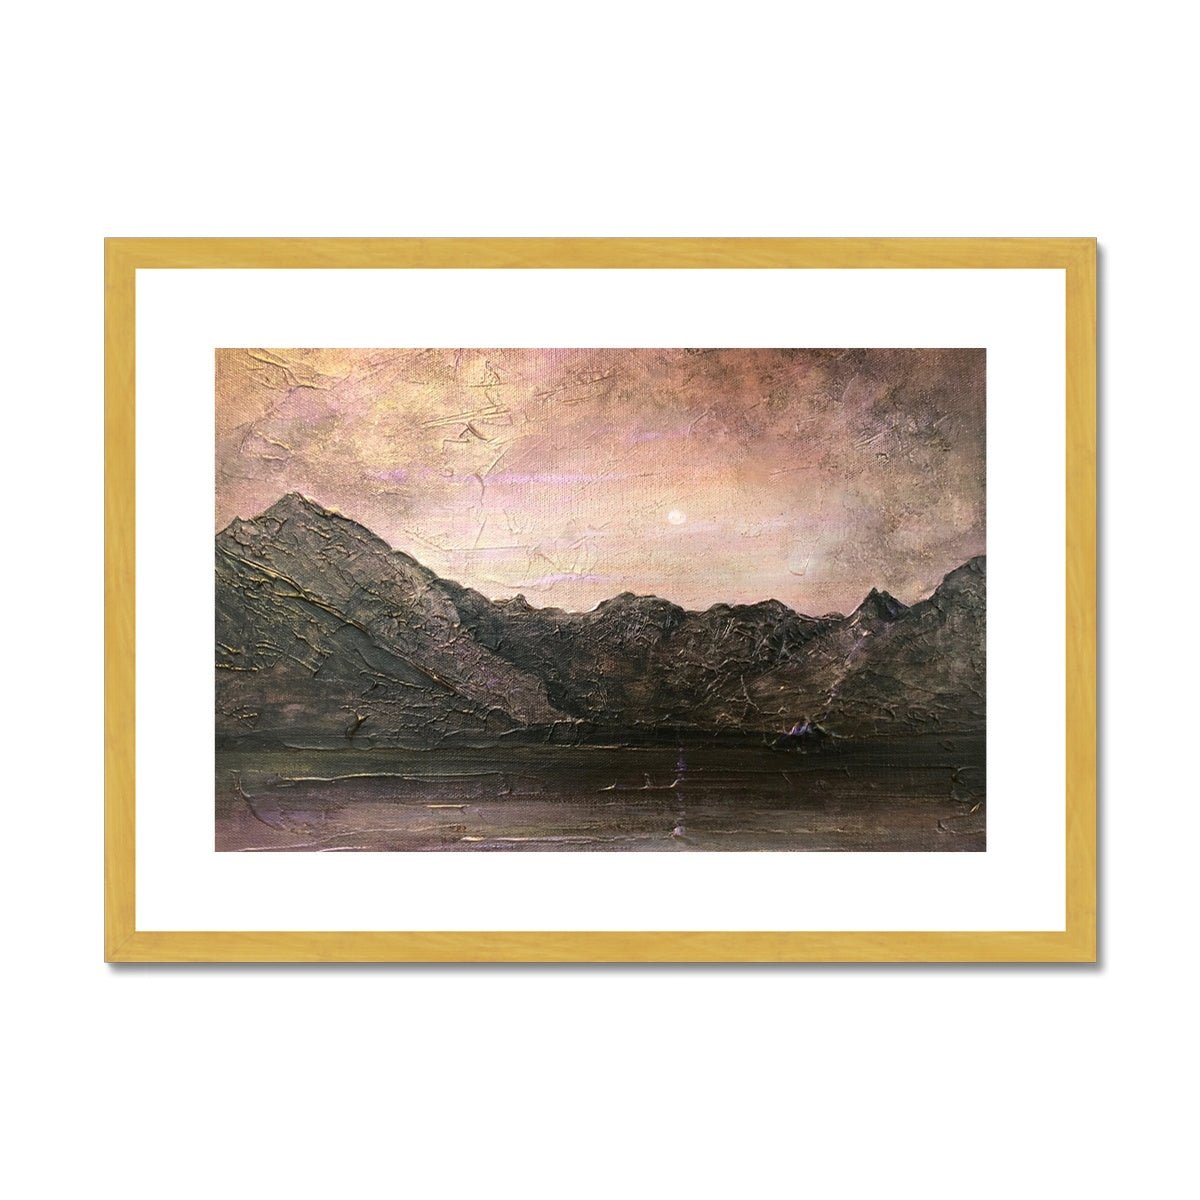 Dubh Ridge Moonlight Skye Painting | Antique Framed & Mounted Prints From Scotland-Antique Framed & Mounted Prints-Skye Art Gallery-A2 Landscape-Gold Frame-Paintings, Prints, Homeware, Art Gifts From Scotland By Scottish Artist Kevin Hunter